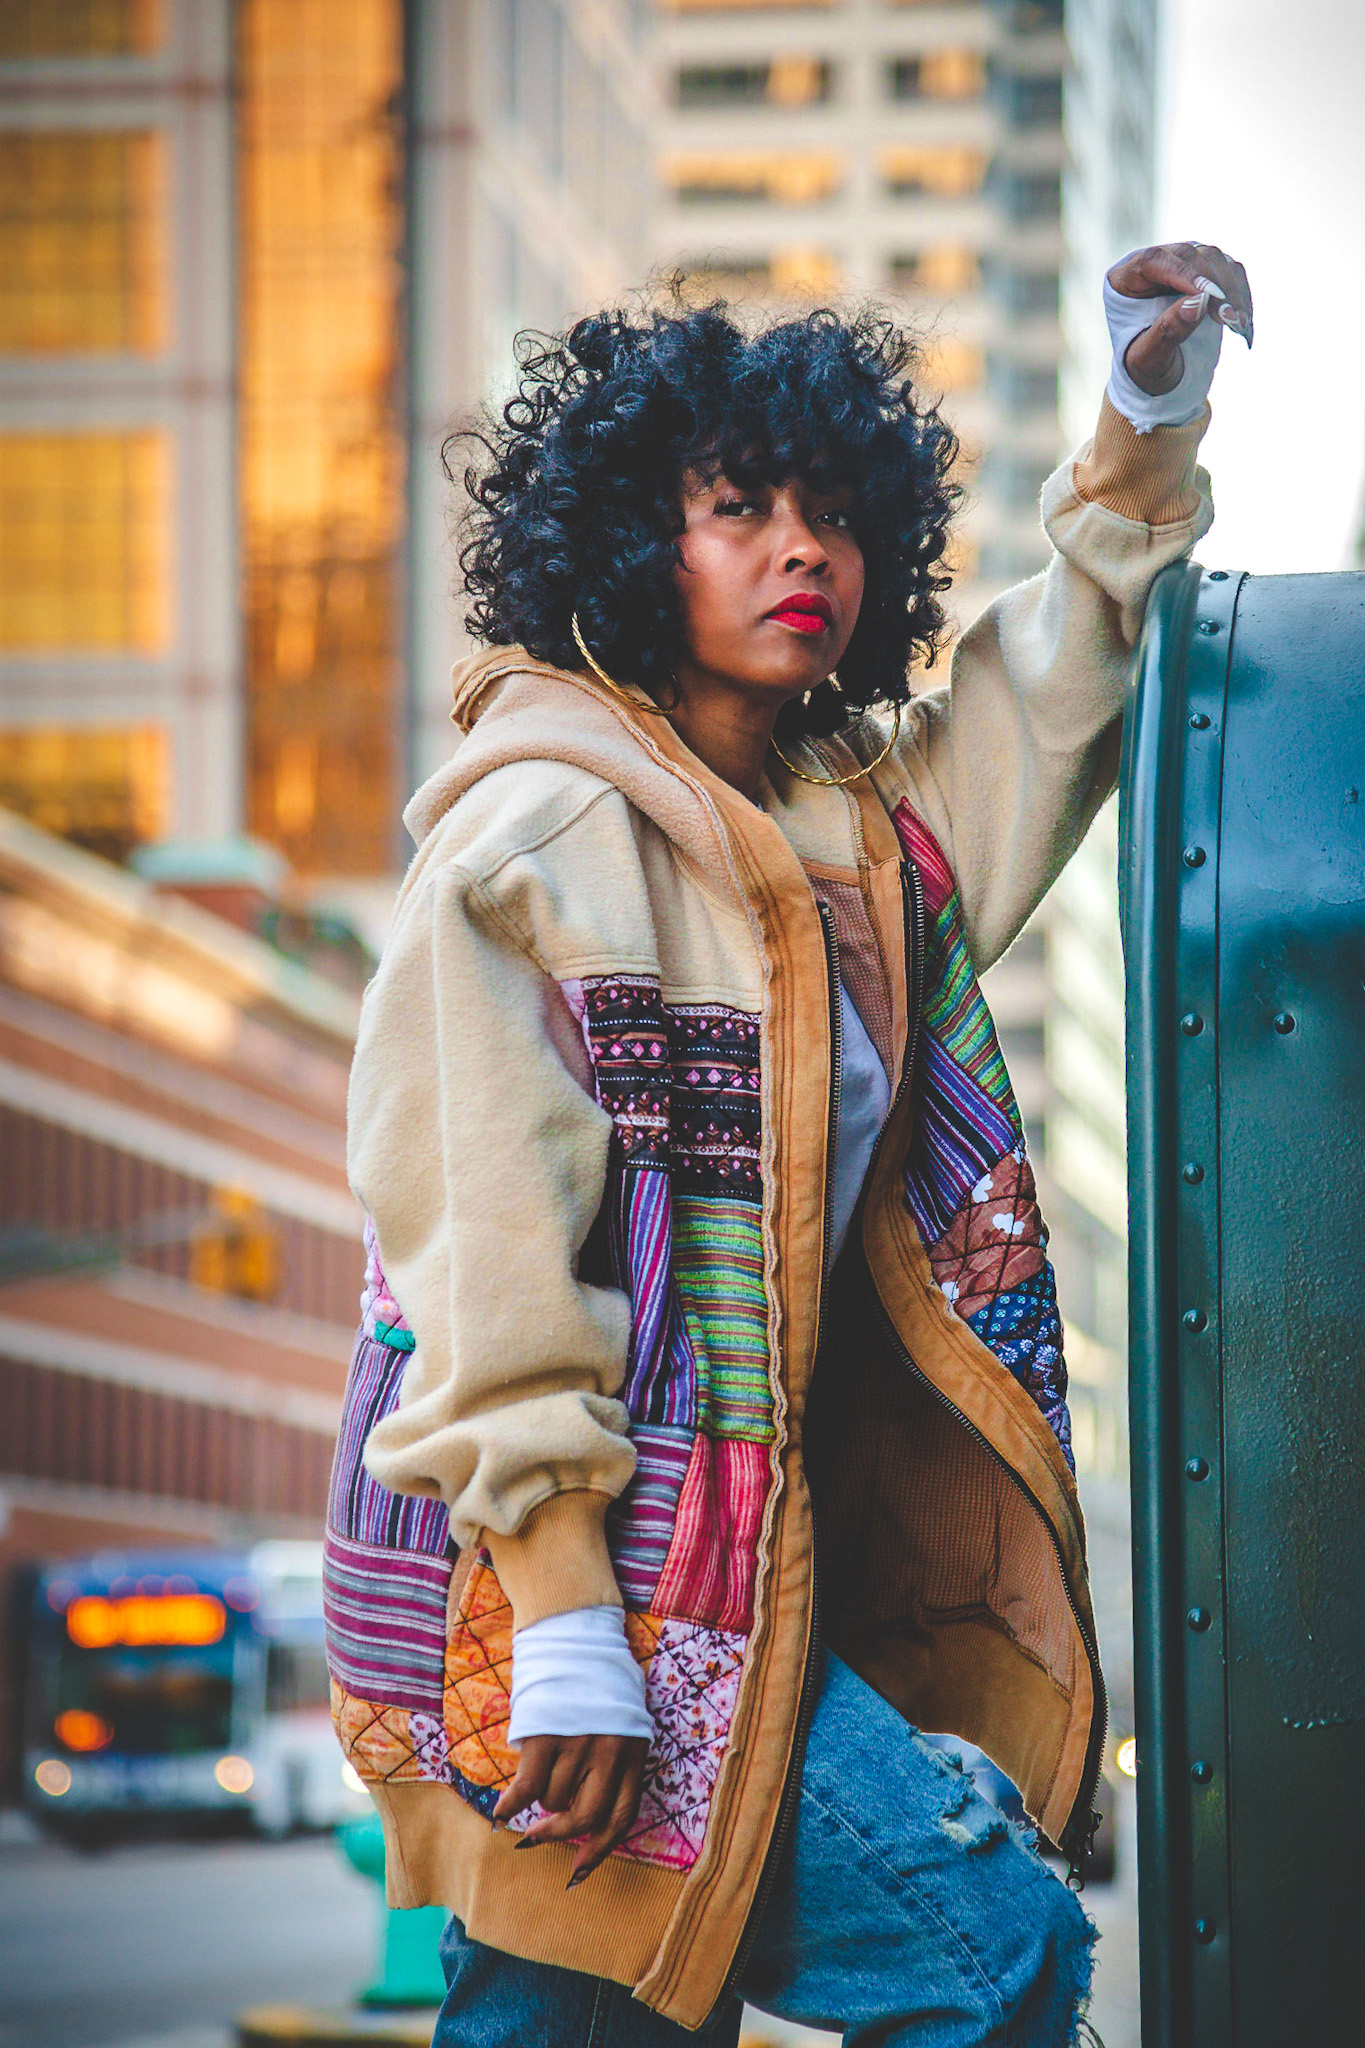 FREE PEOPLE, SWEENEE STYLE, FREE PEOPLE DENIM, DR MARTENS, NATURAL HAIR, INDIANAPOLIS FASHION BLOG, BLACK GIRLS WHO BLOG, EASY OUTFIT IDEAS, WINTER